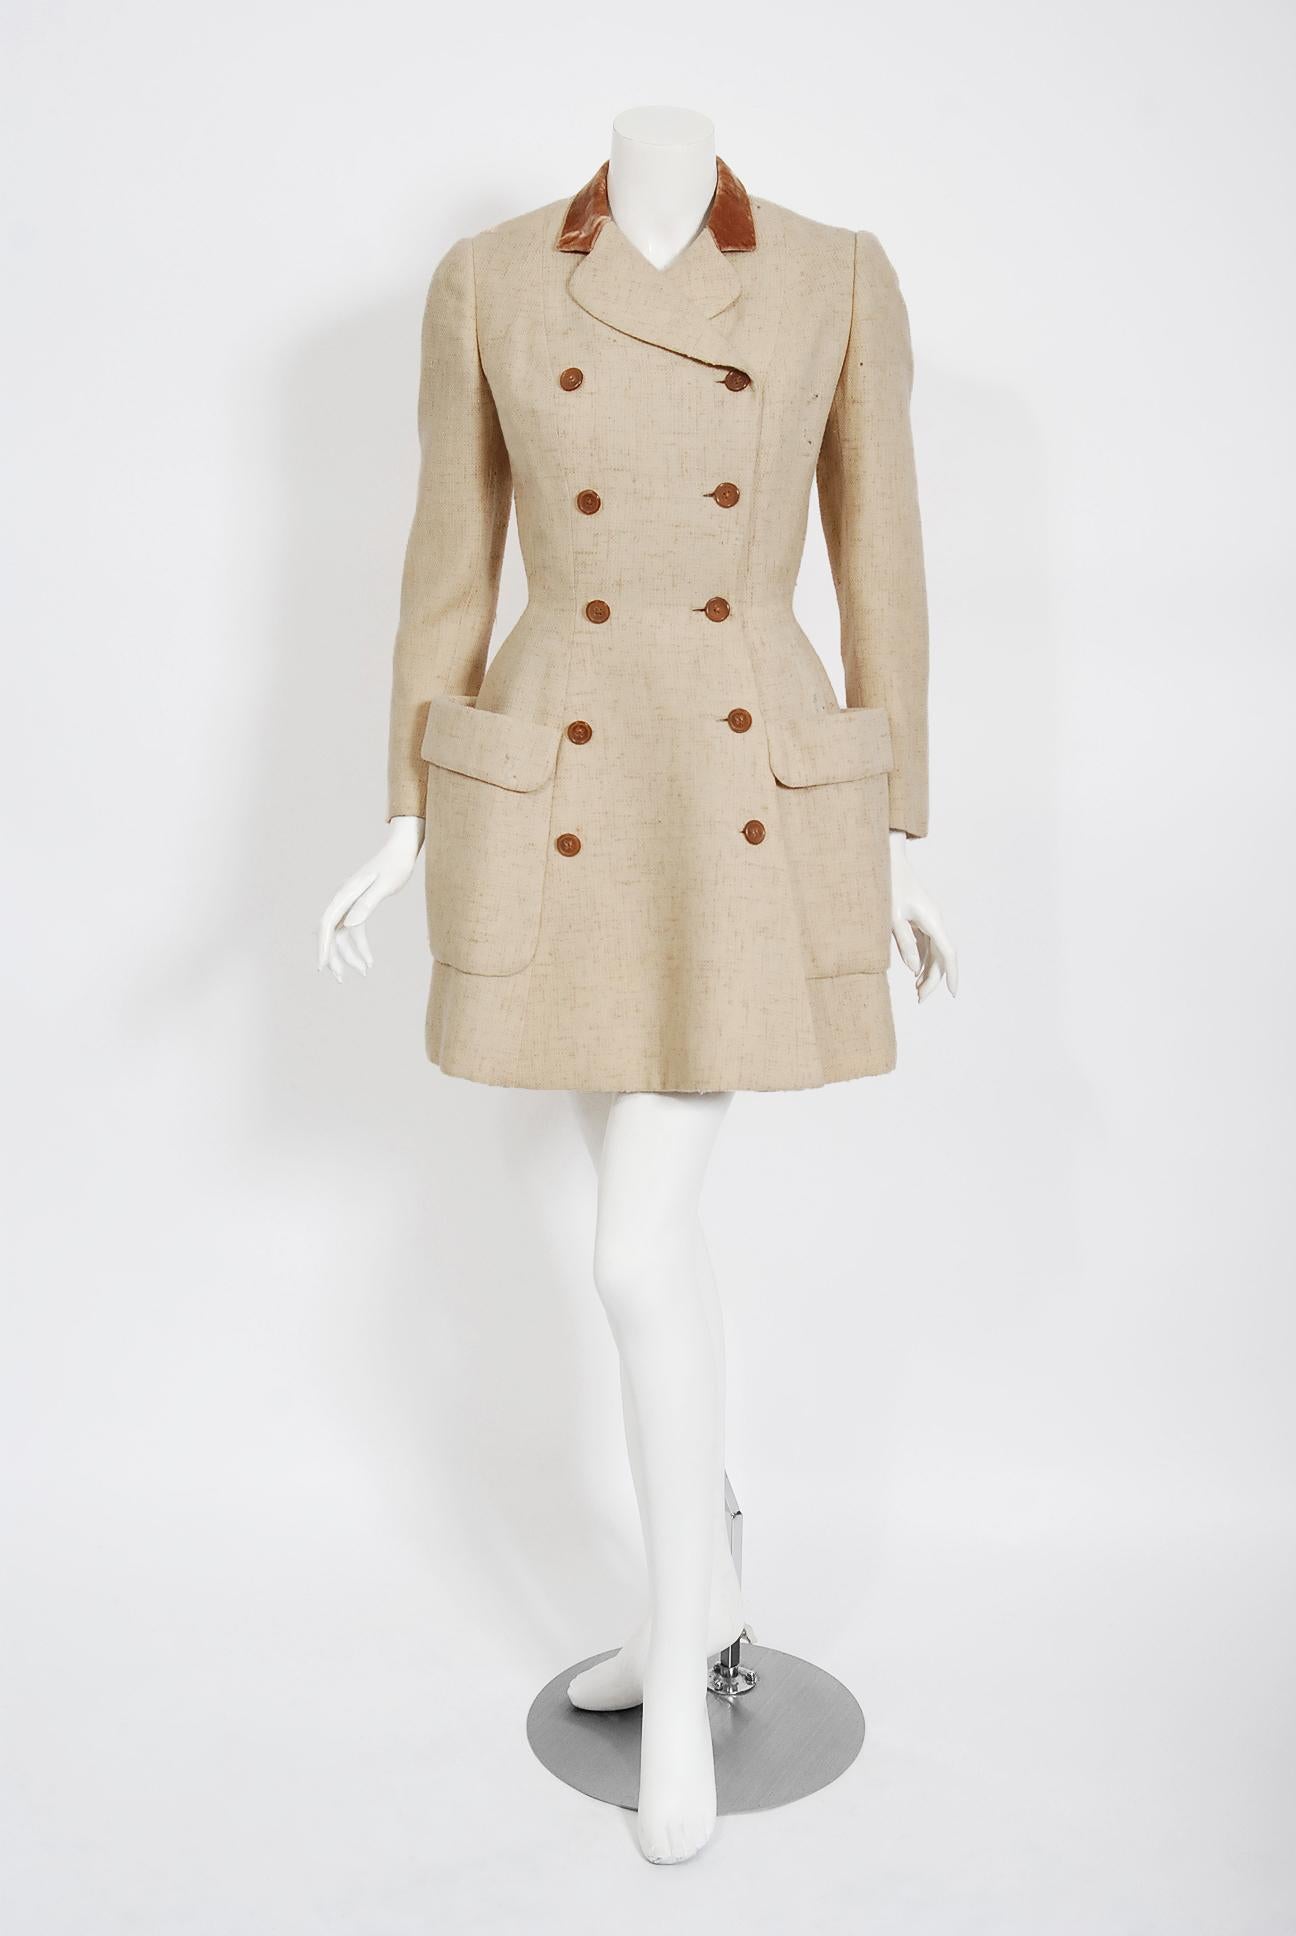 This exquisite 1955 Traina-Norell designer jacket, in mid-weight oatmeal beige wool tweed, exemplifies their signature blend of couture-level quality with quintessentially American style—elegant in its simplicity. A very similar garment was